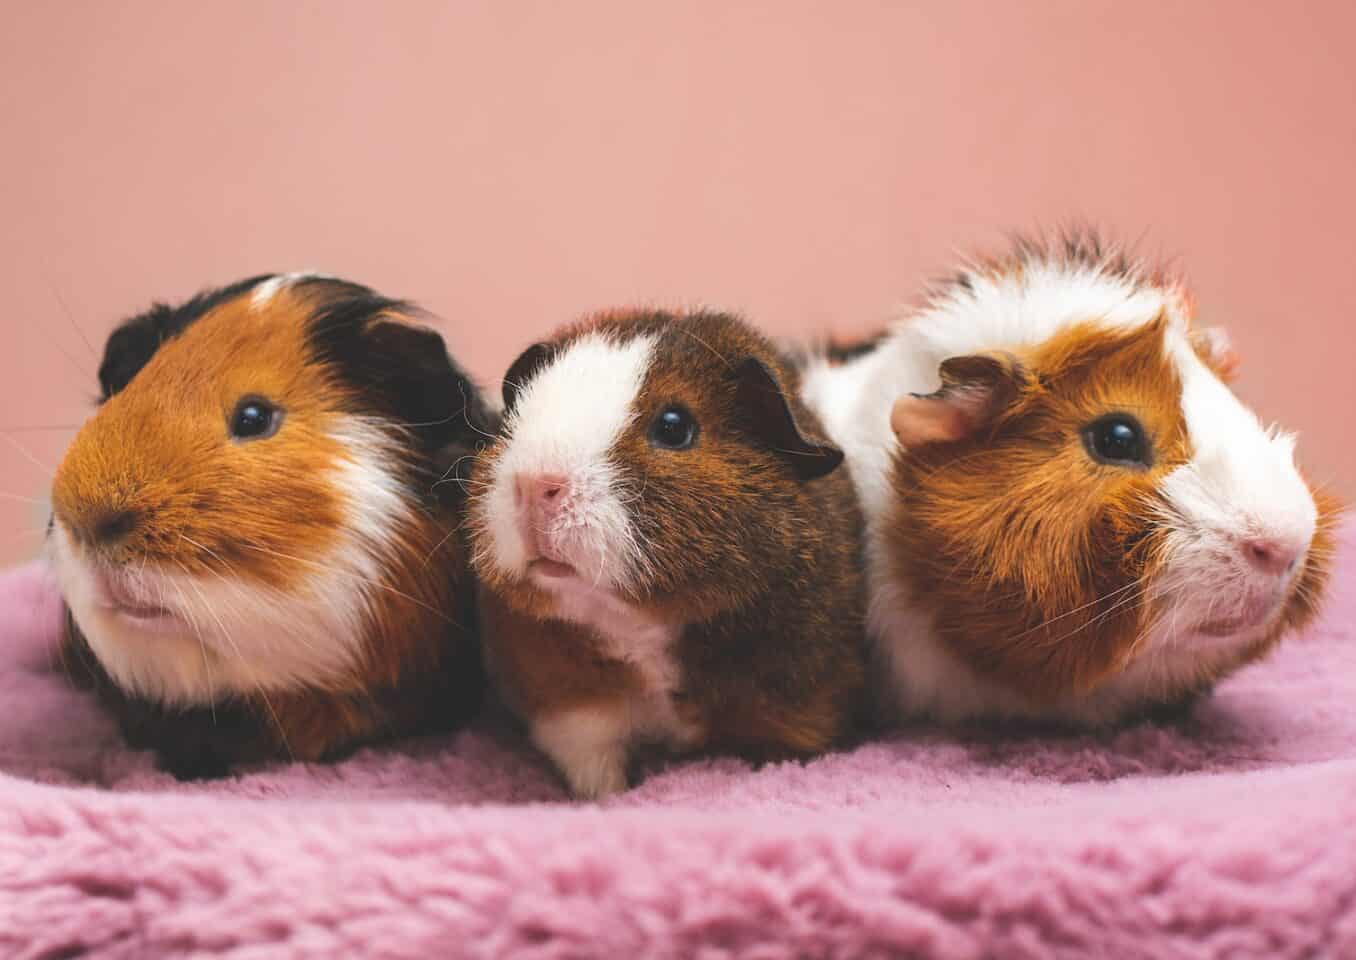 brown and white guinea pig on pink textile